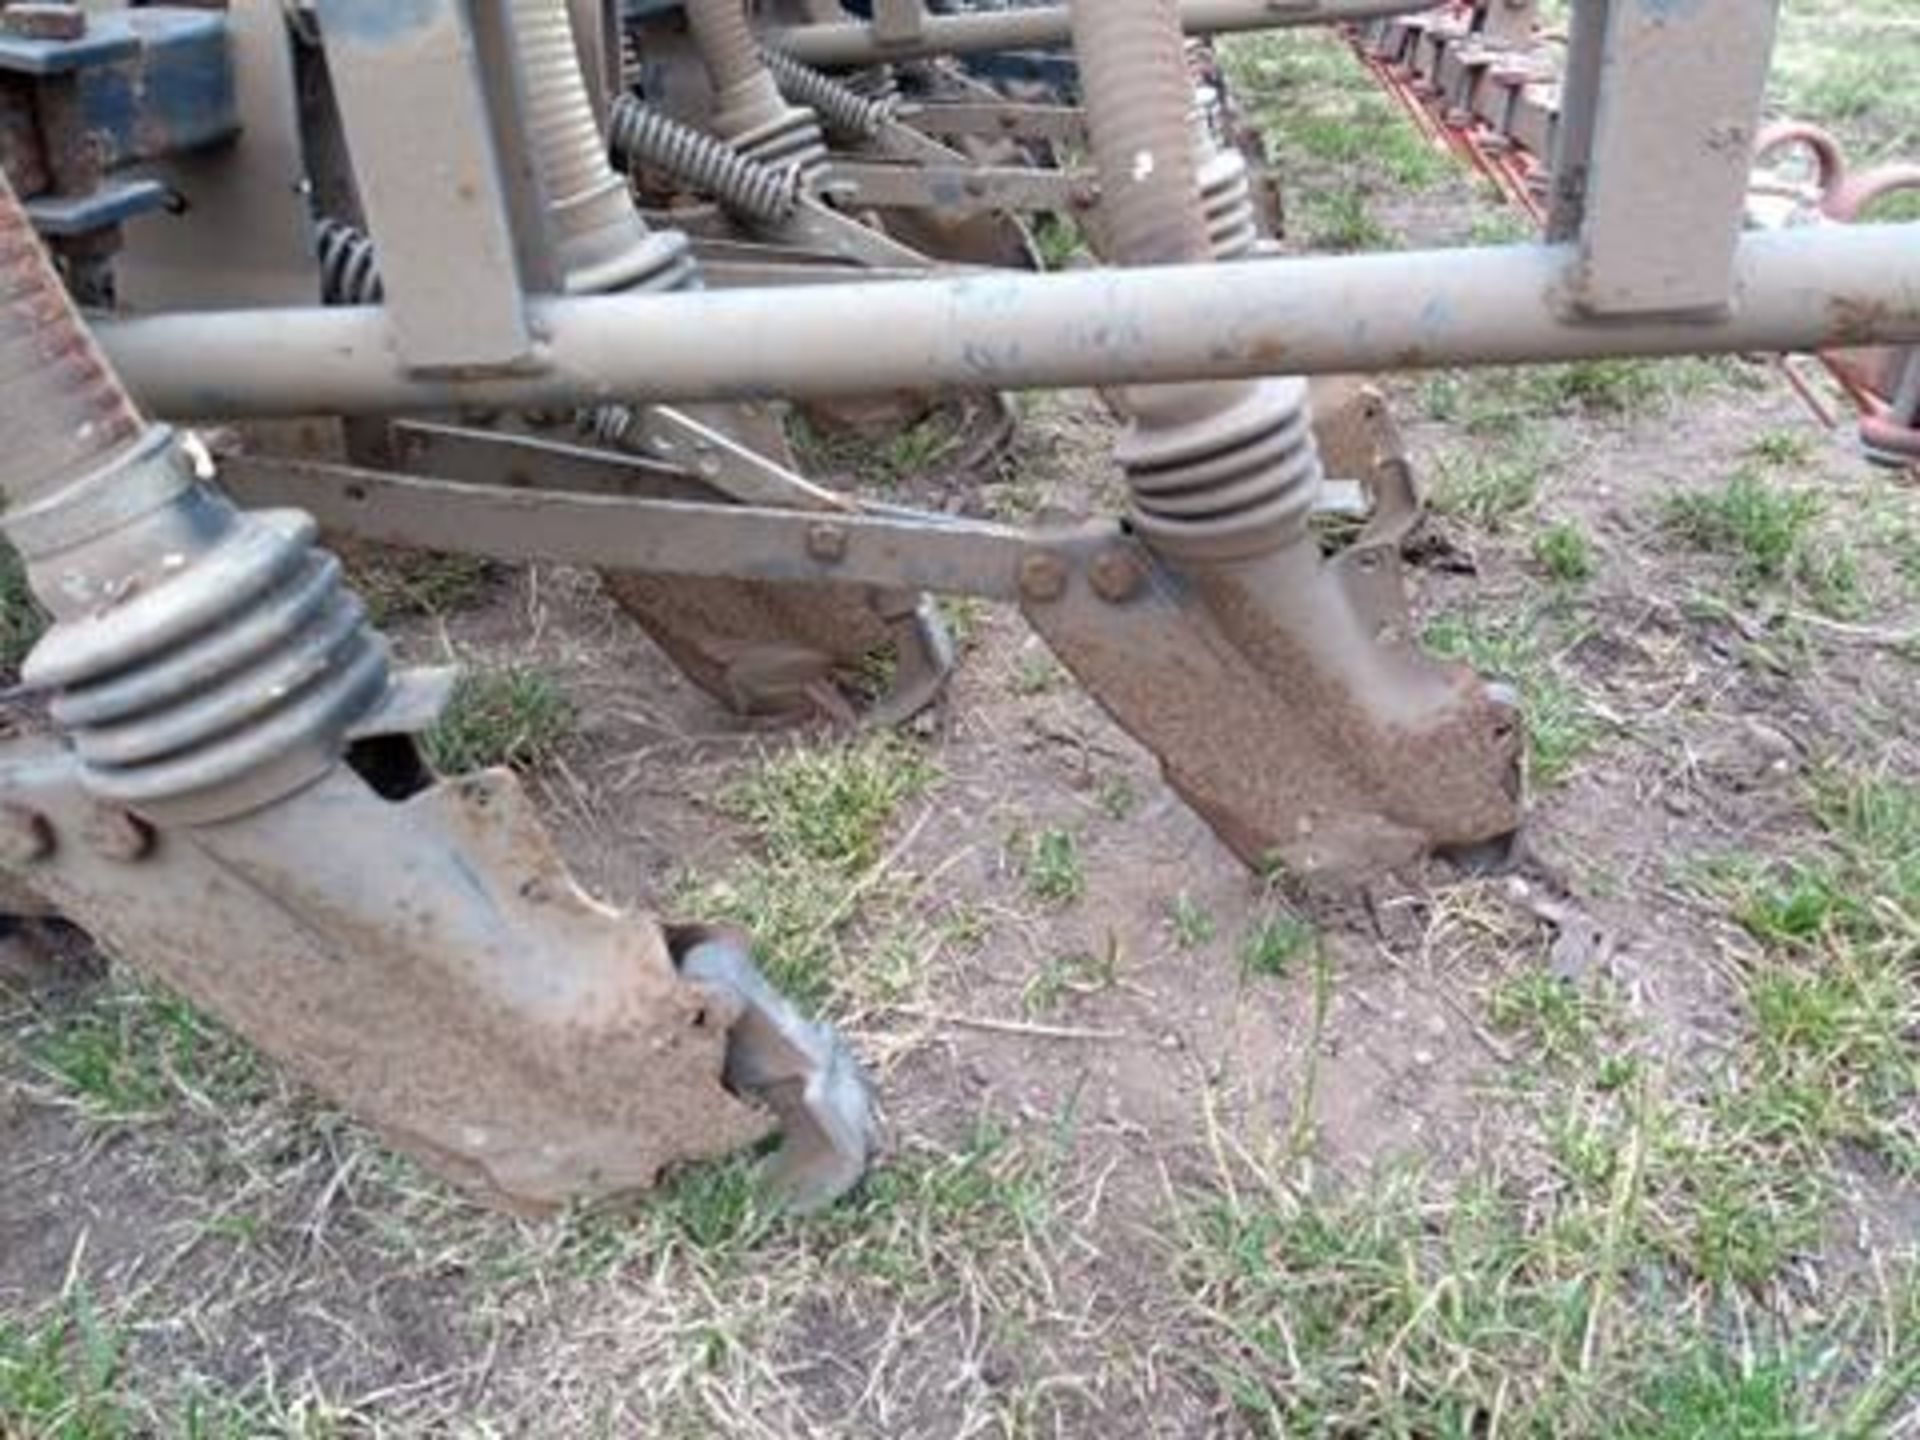 KRM R600 SEED DRILL, GOOD CONDITION AND IN FULL WORKING ORDER, HYDRAULIC MARKERS, TRAM LINING KIT - Image 5 of 10